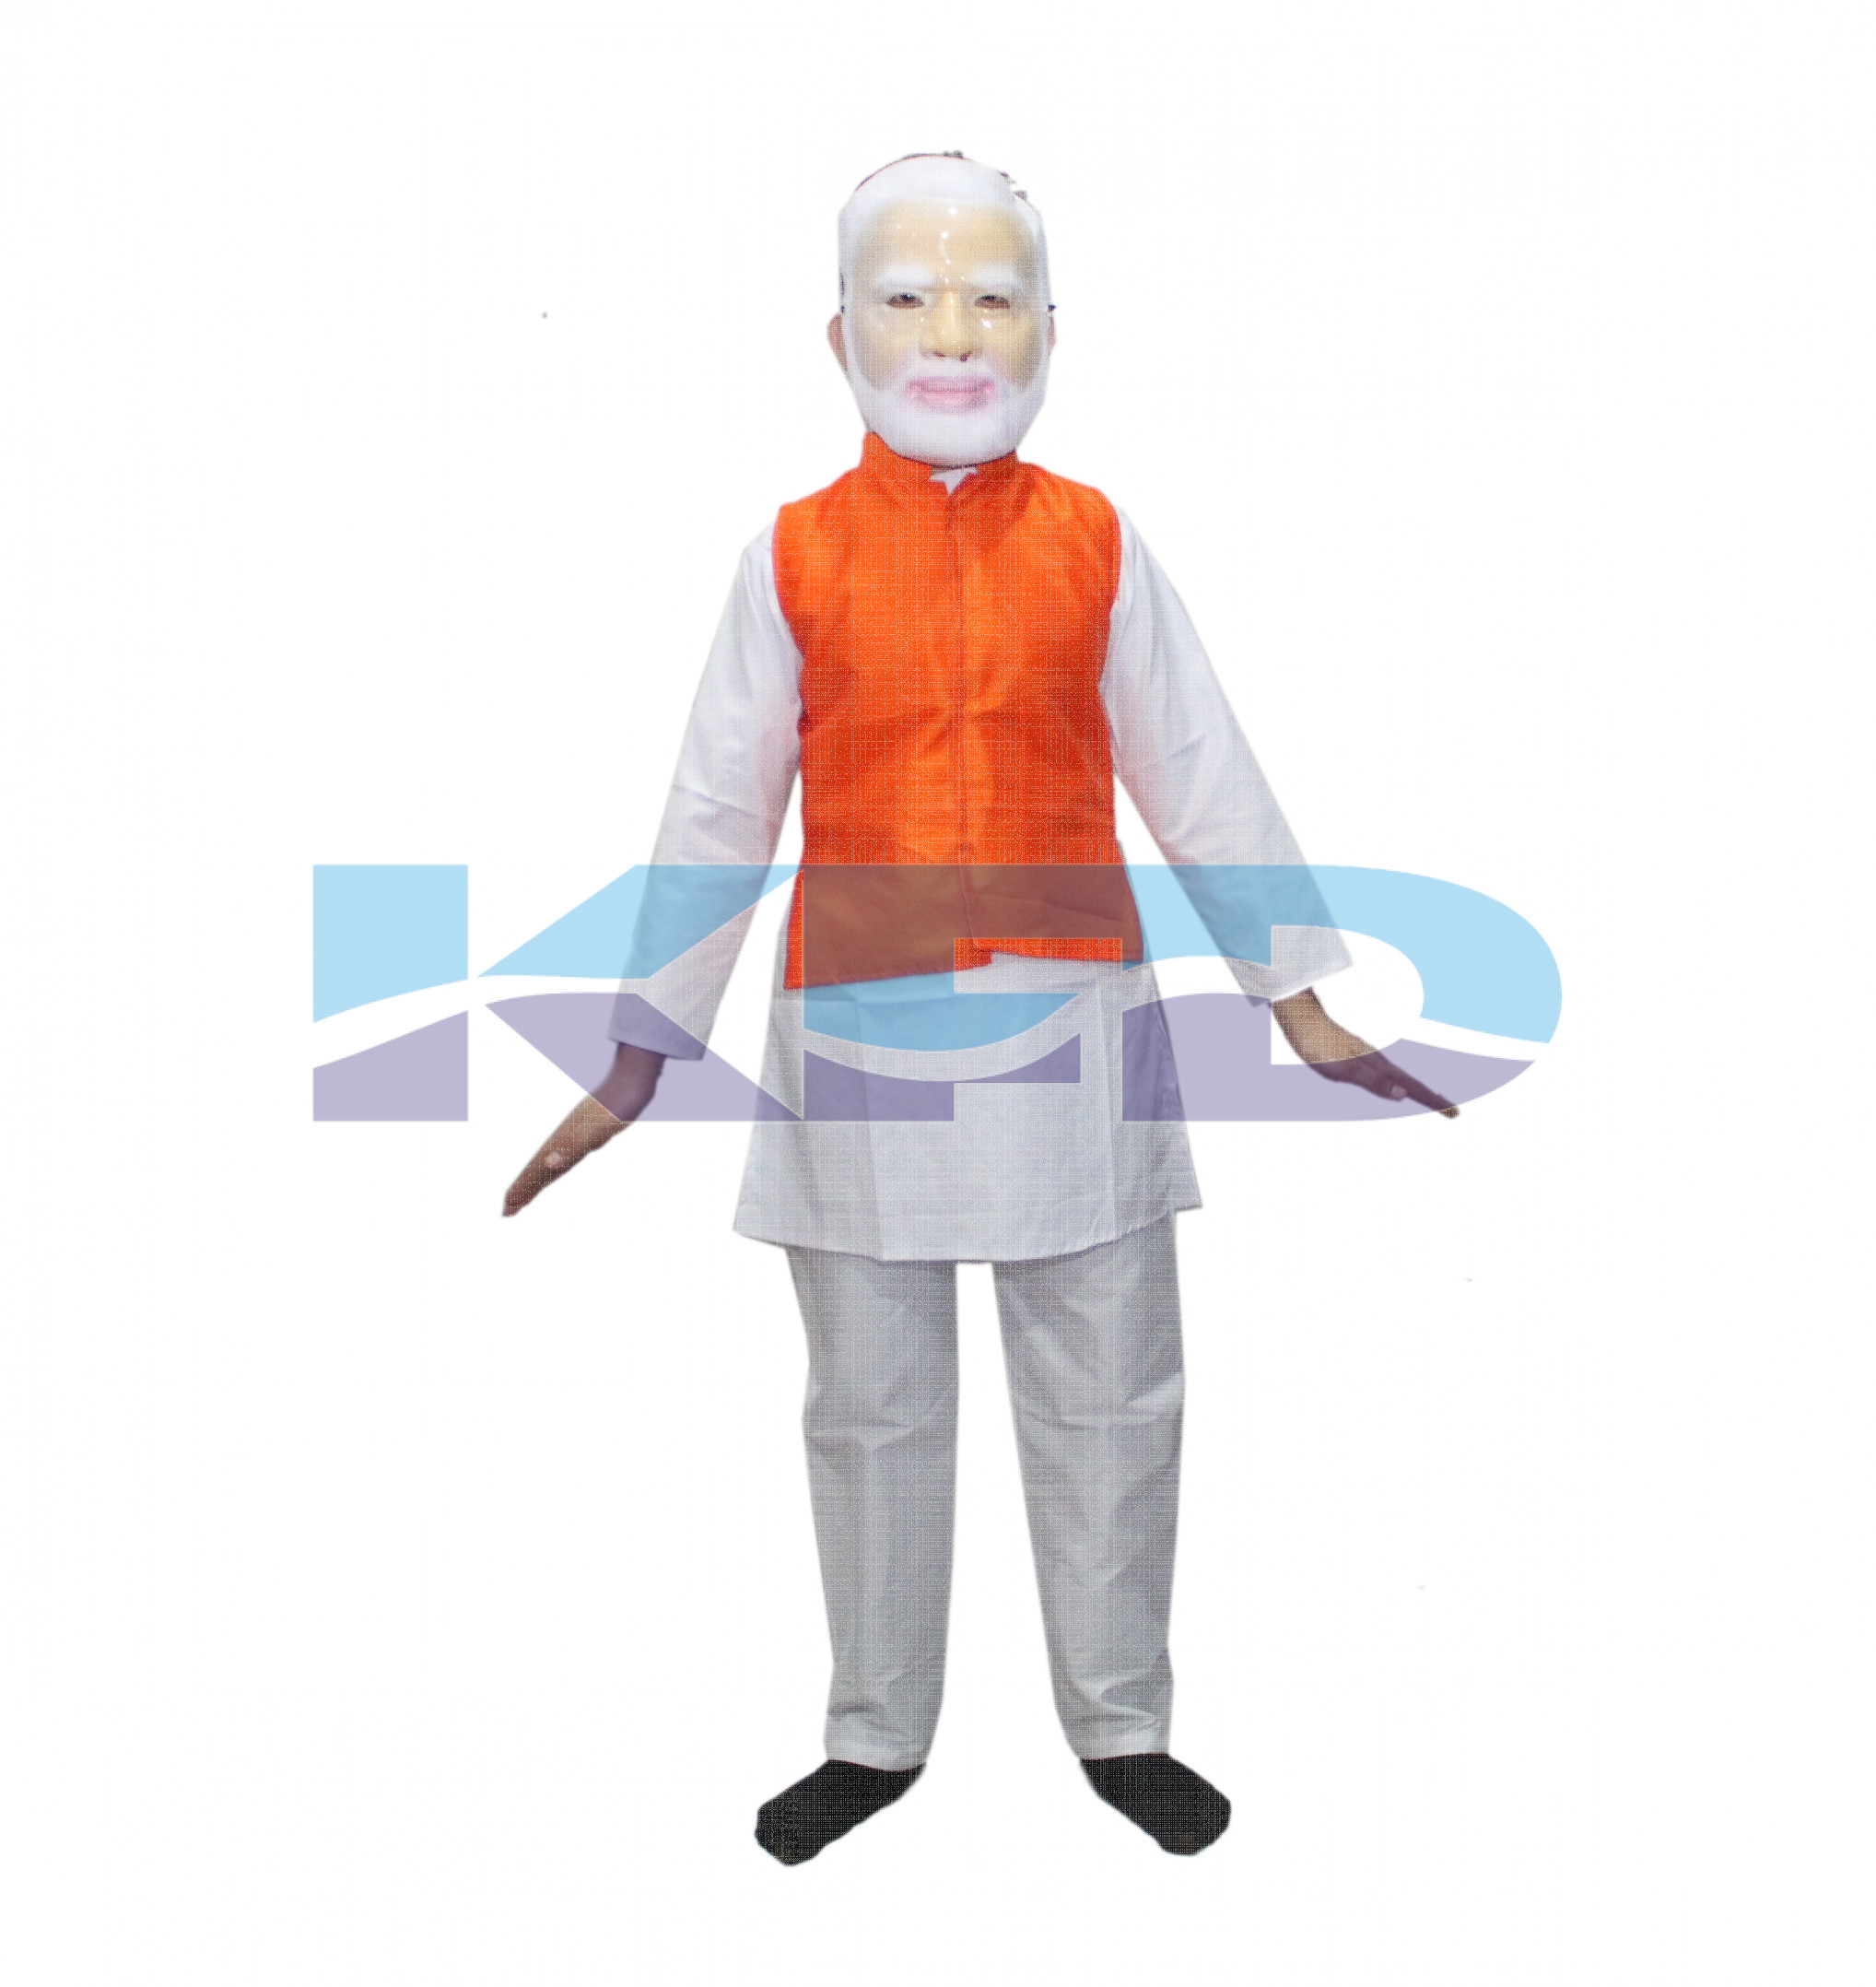 Modi Fancy Dress For Kids/National Hero/freedom figter Costume For Kids independence Day/Republic Day/Annual function/Theme party/Competition/Stage Shows Dress